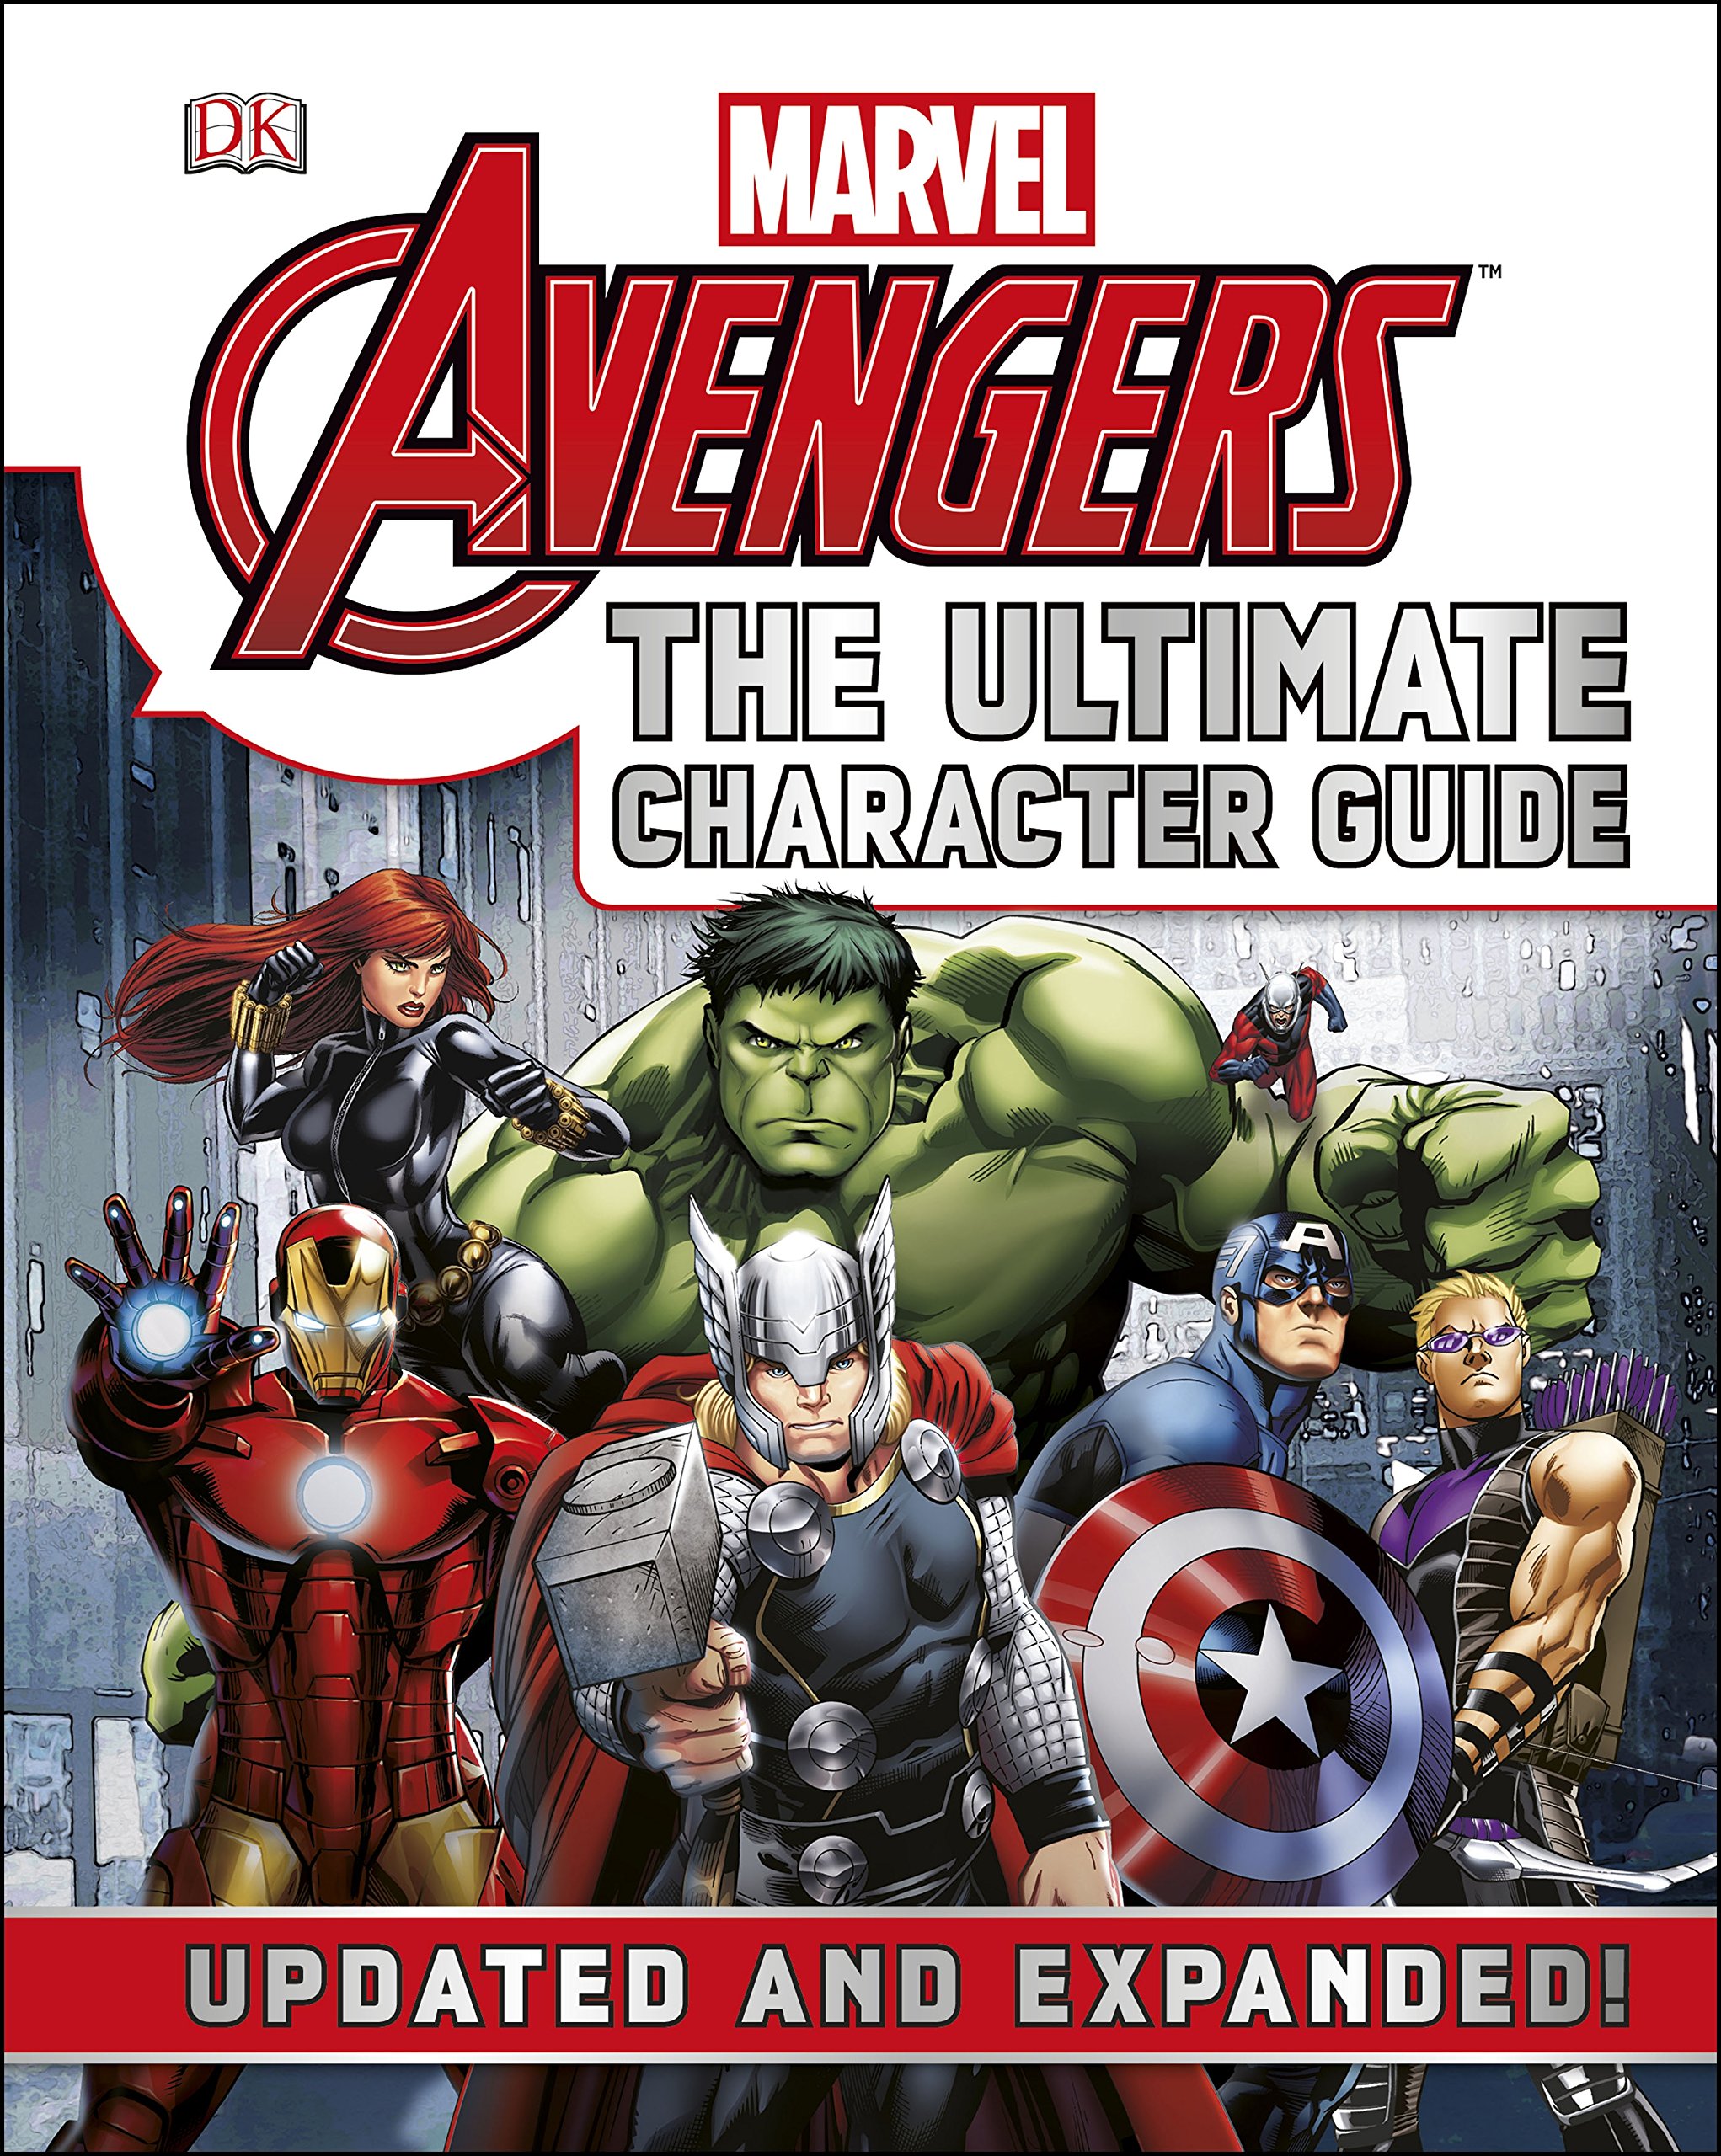 The Avengers The Ultimate Character Guide (2015)